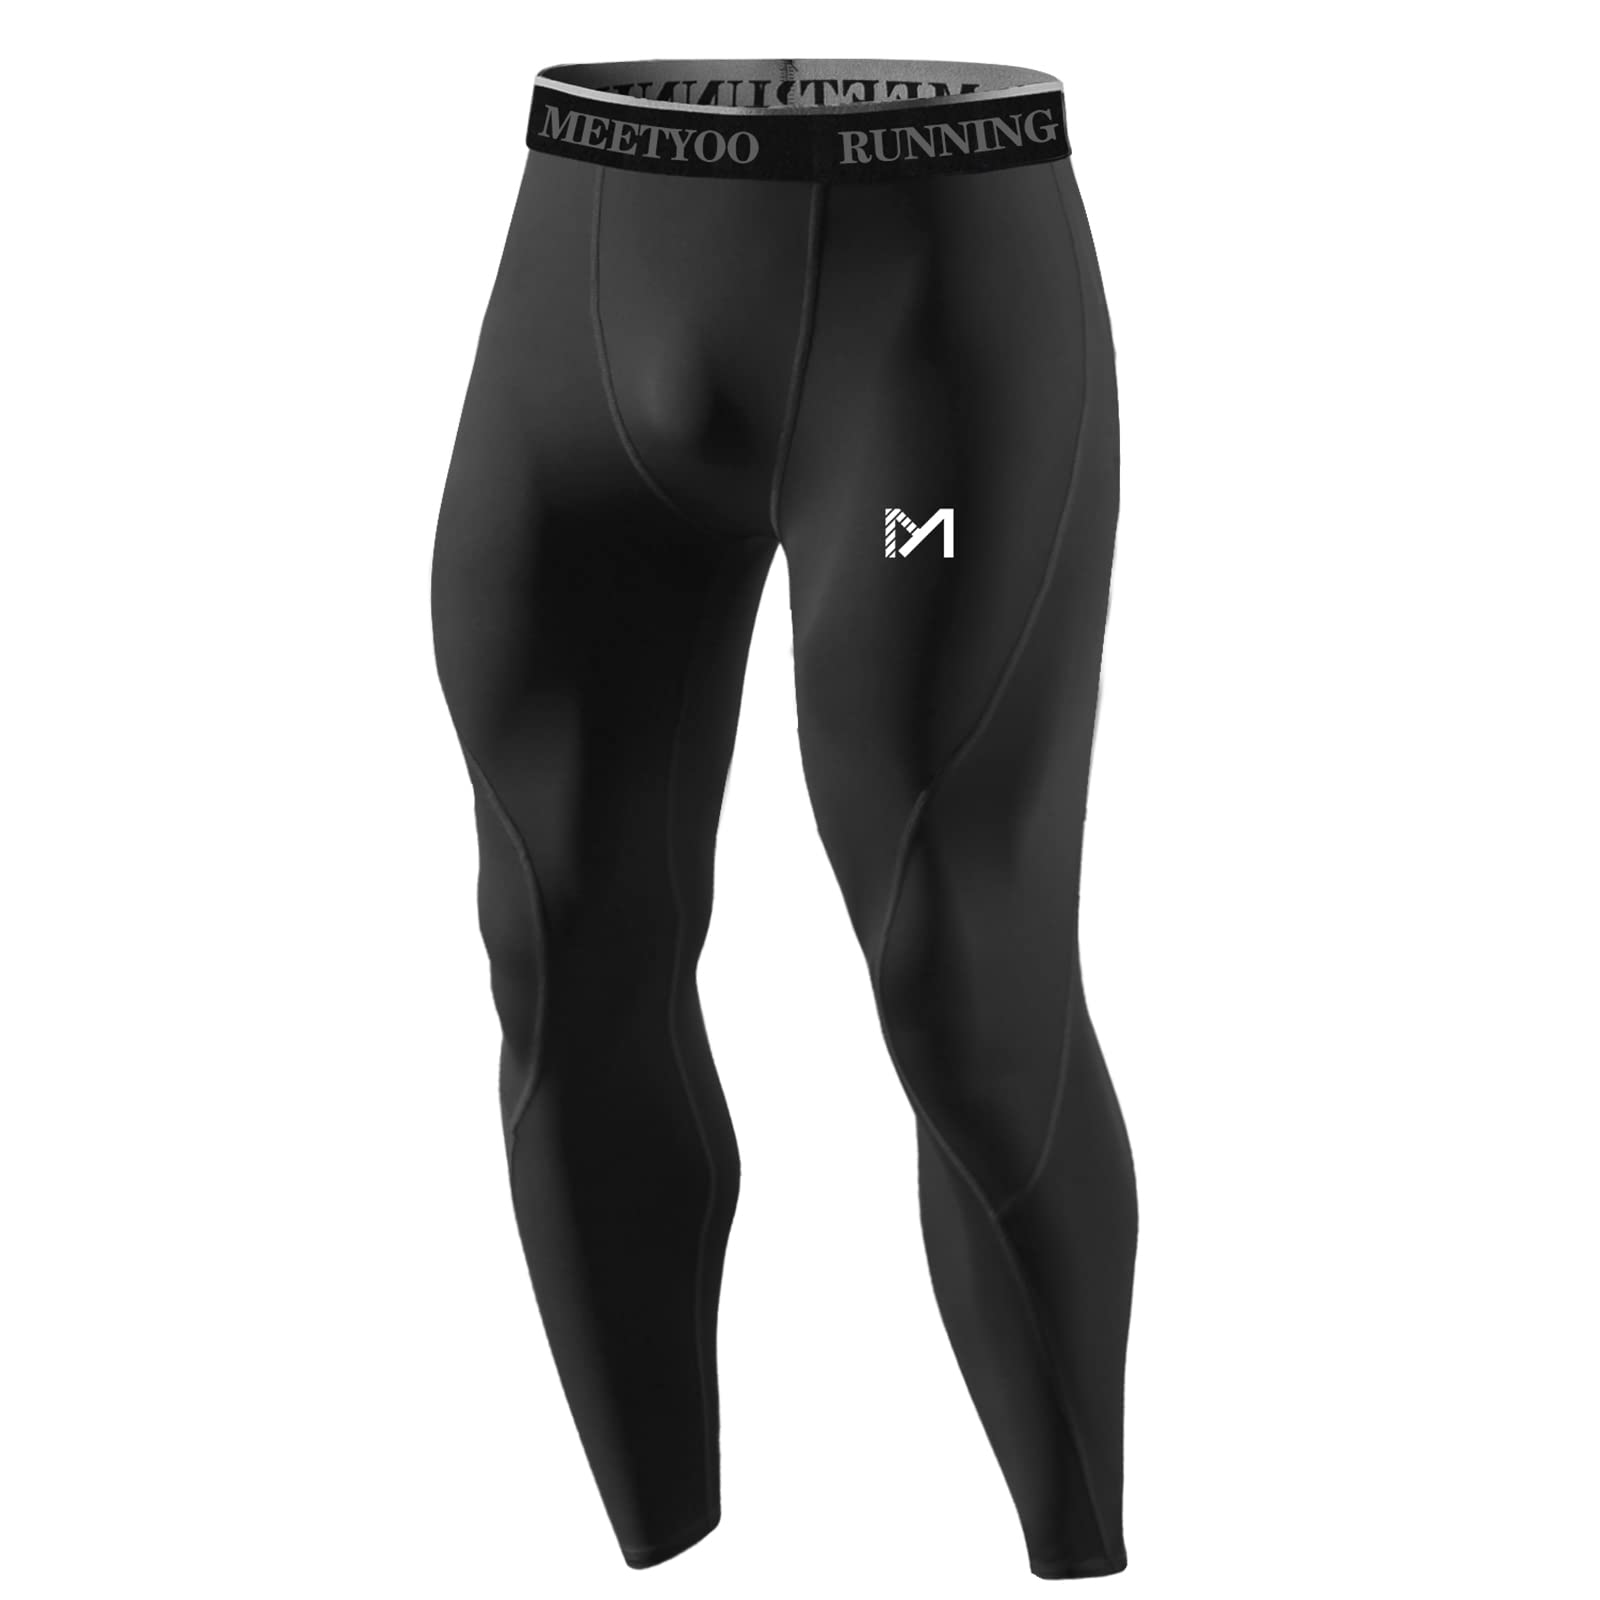 MEETYOO Men's Compression Pants, Cool Dry Sports Workout Running